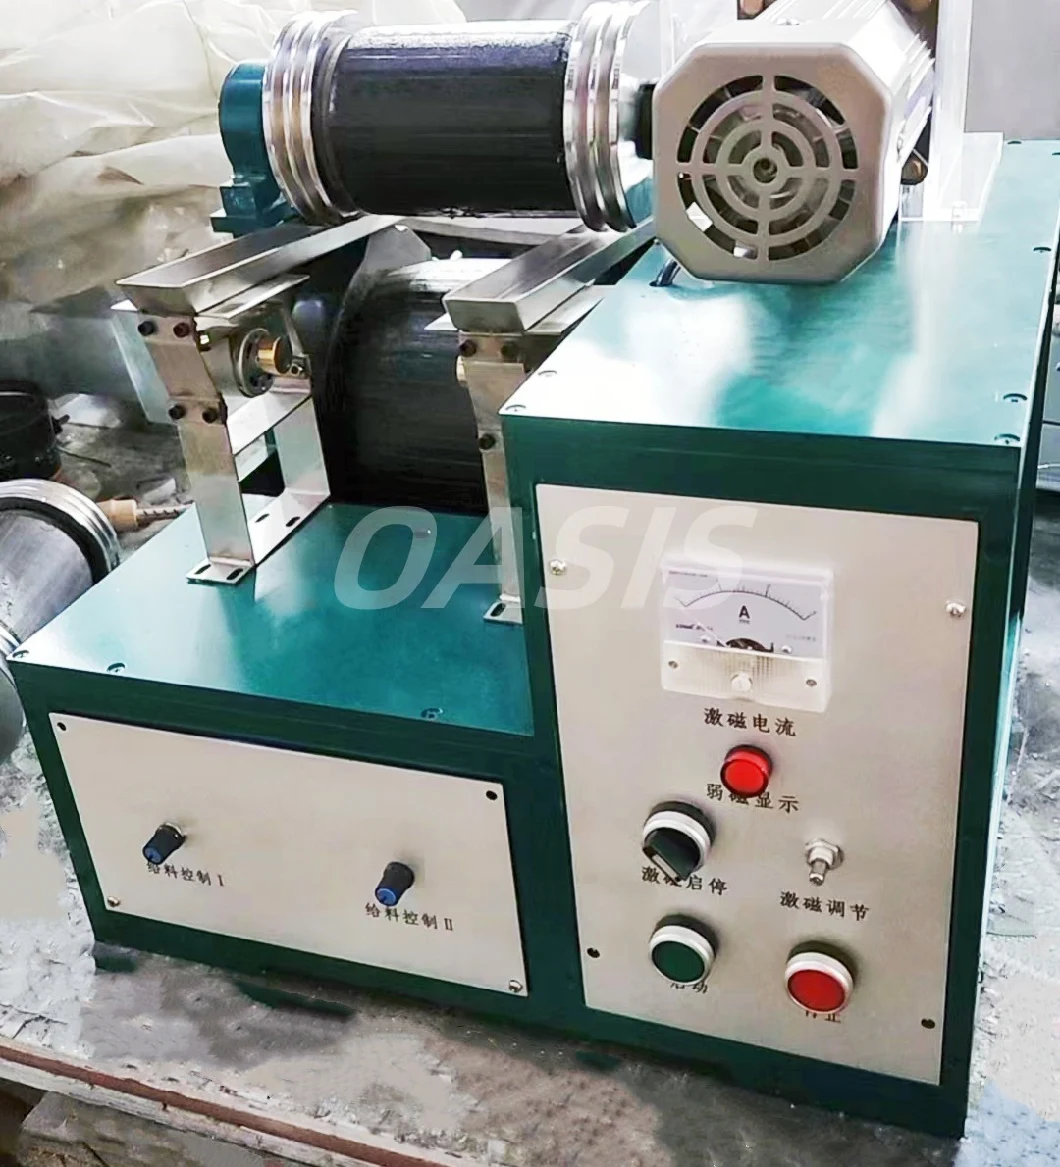 Laboratory Roll Dry Magnetic Separator for Mineral Magnet Separation Machine